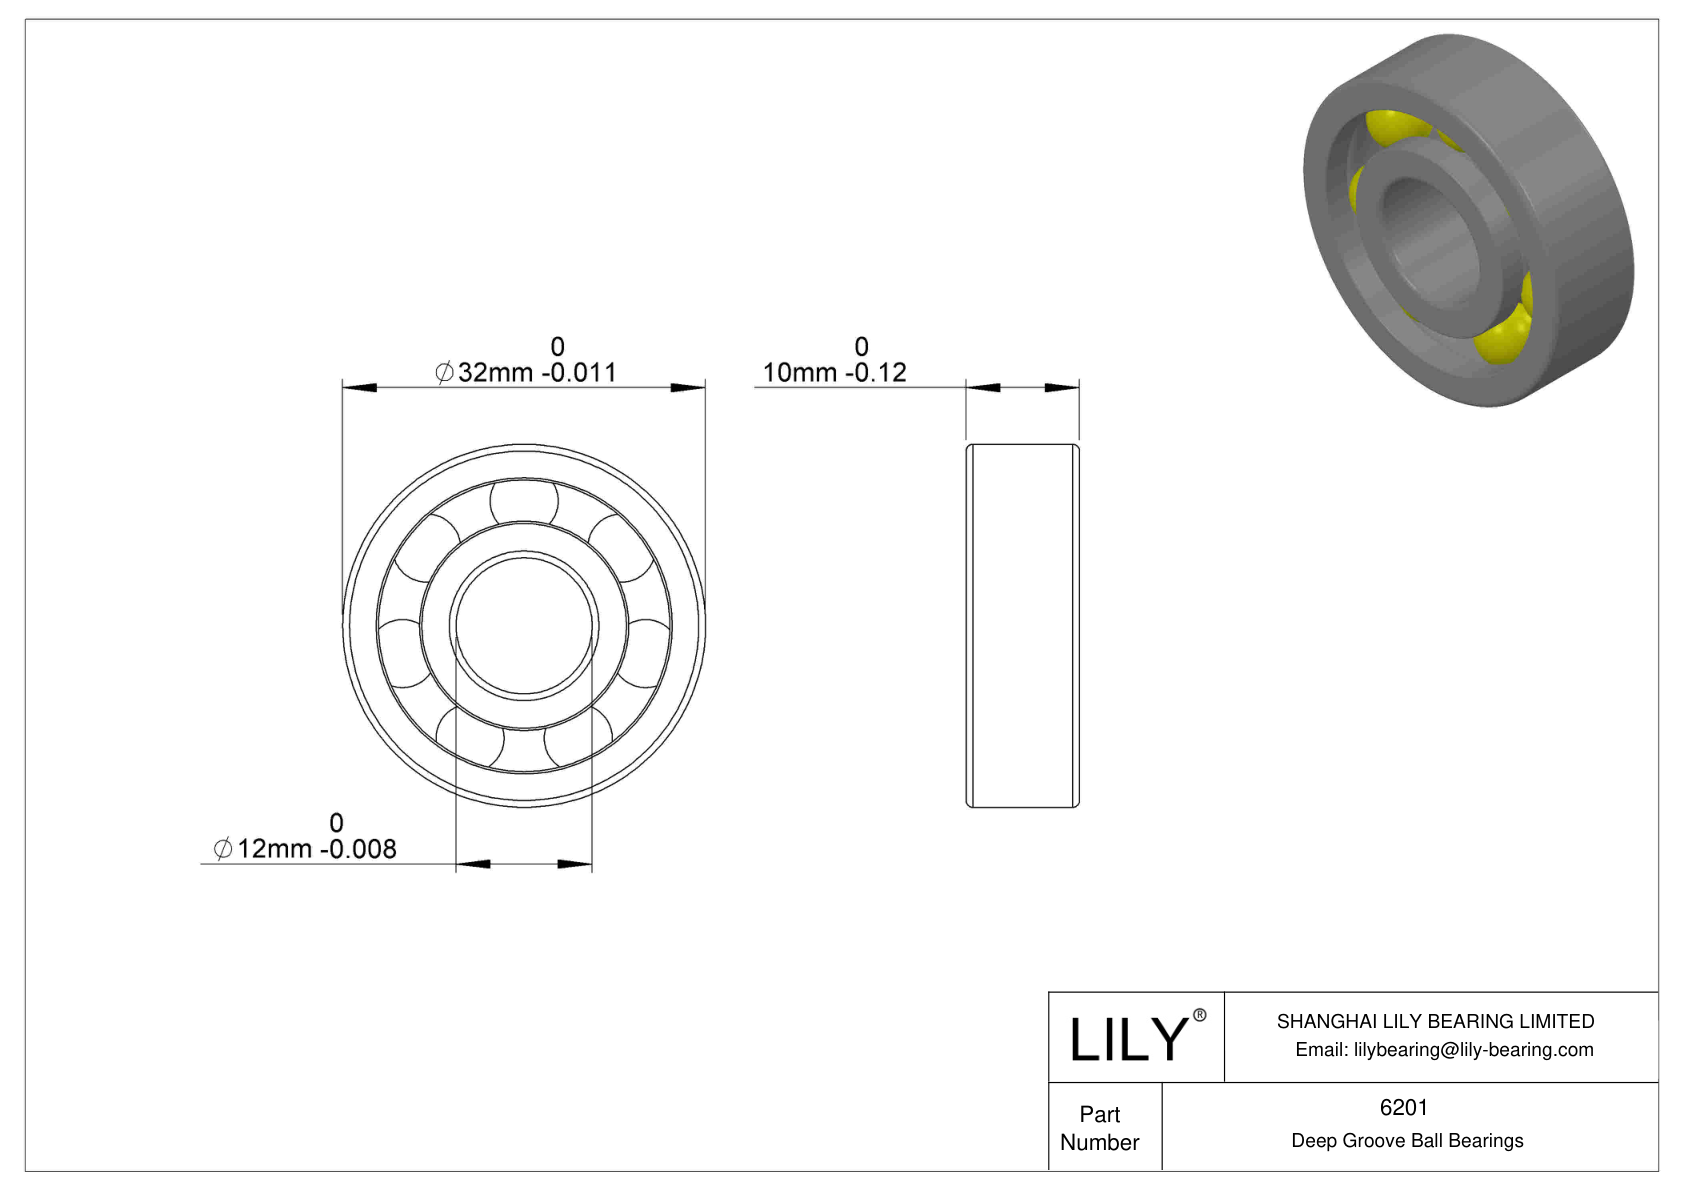 LILY-BS620150-20 POM Coated Bearing cad drawing